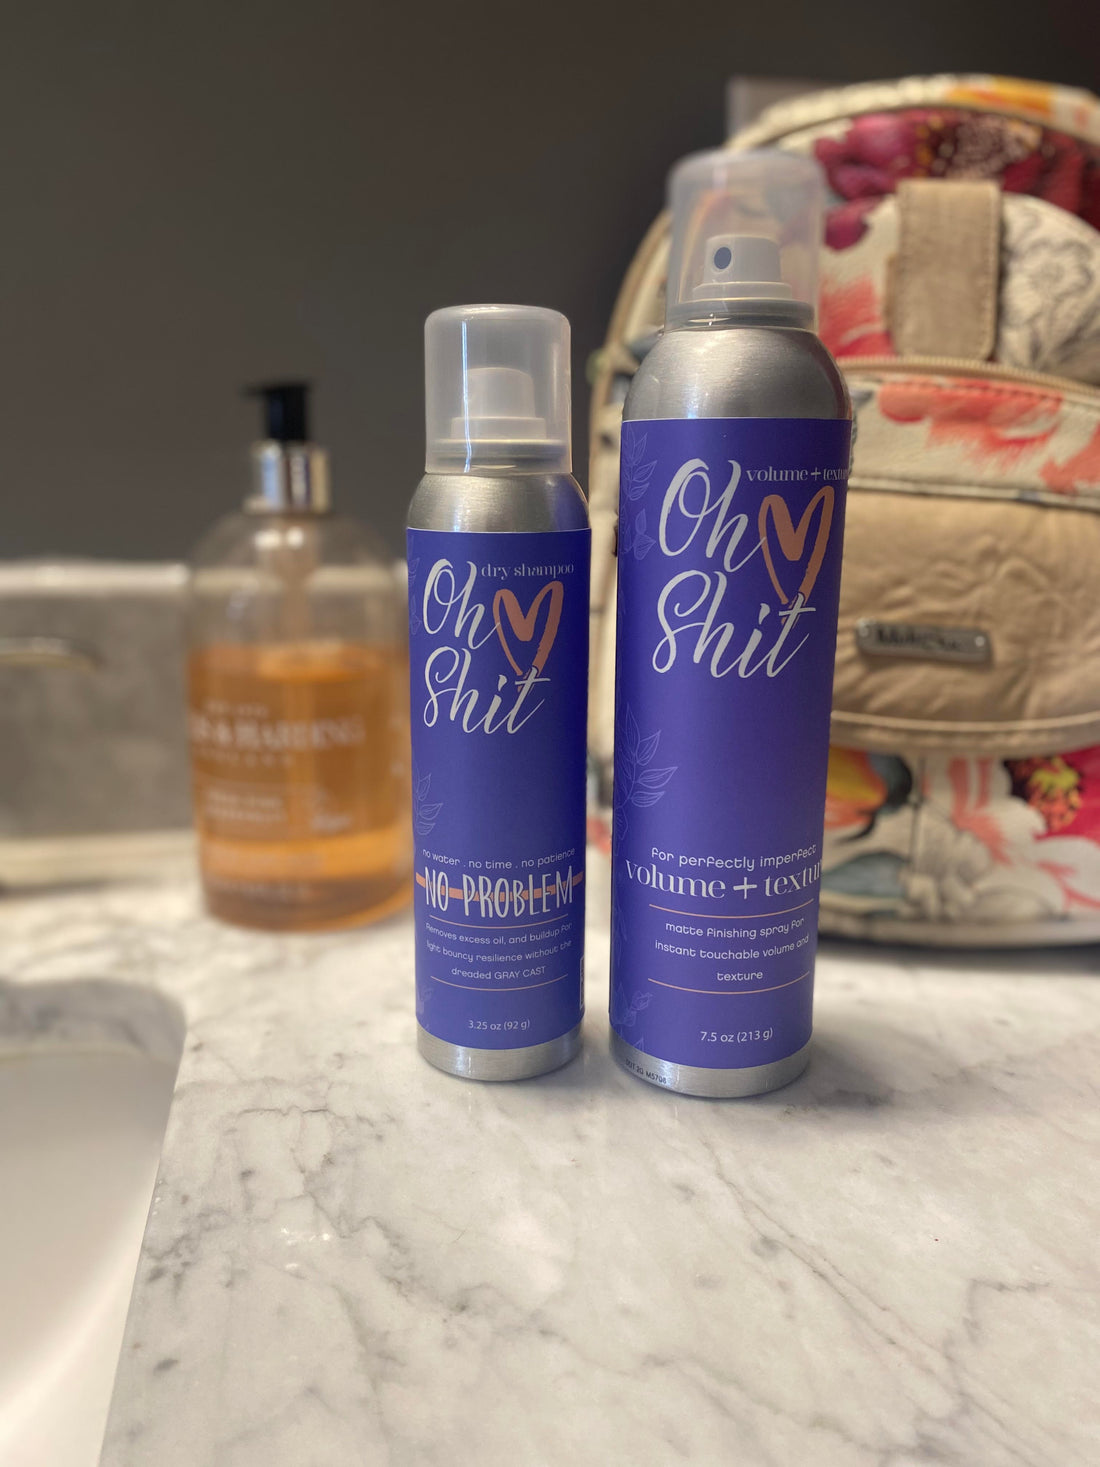 What Distinguishes Oh Shit Dry Shampoo From Oh Shit Volume + Texture Spray?